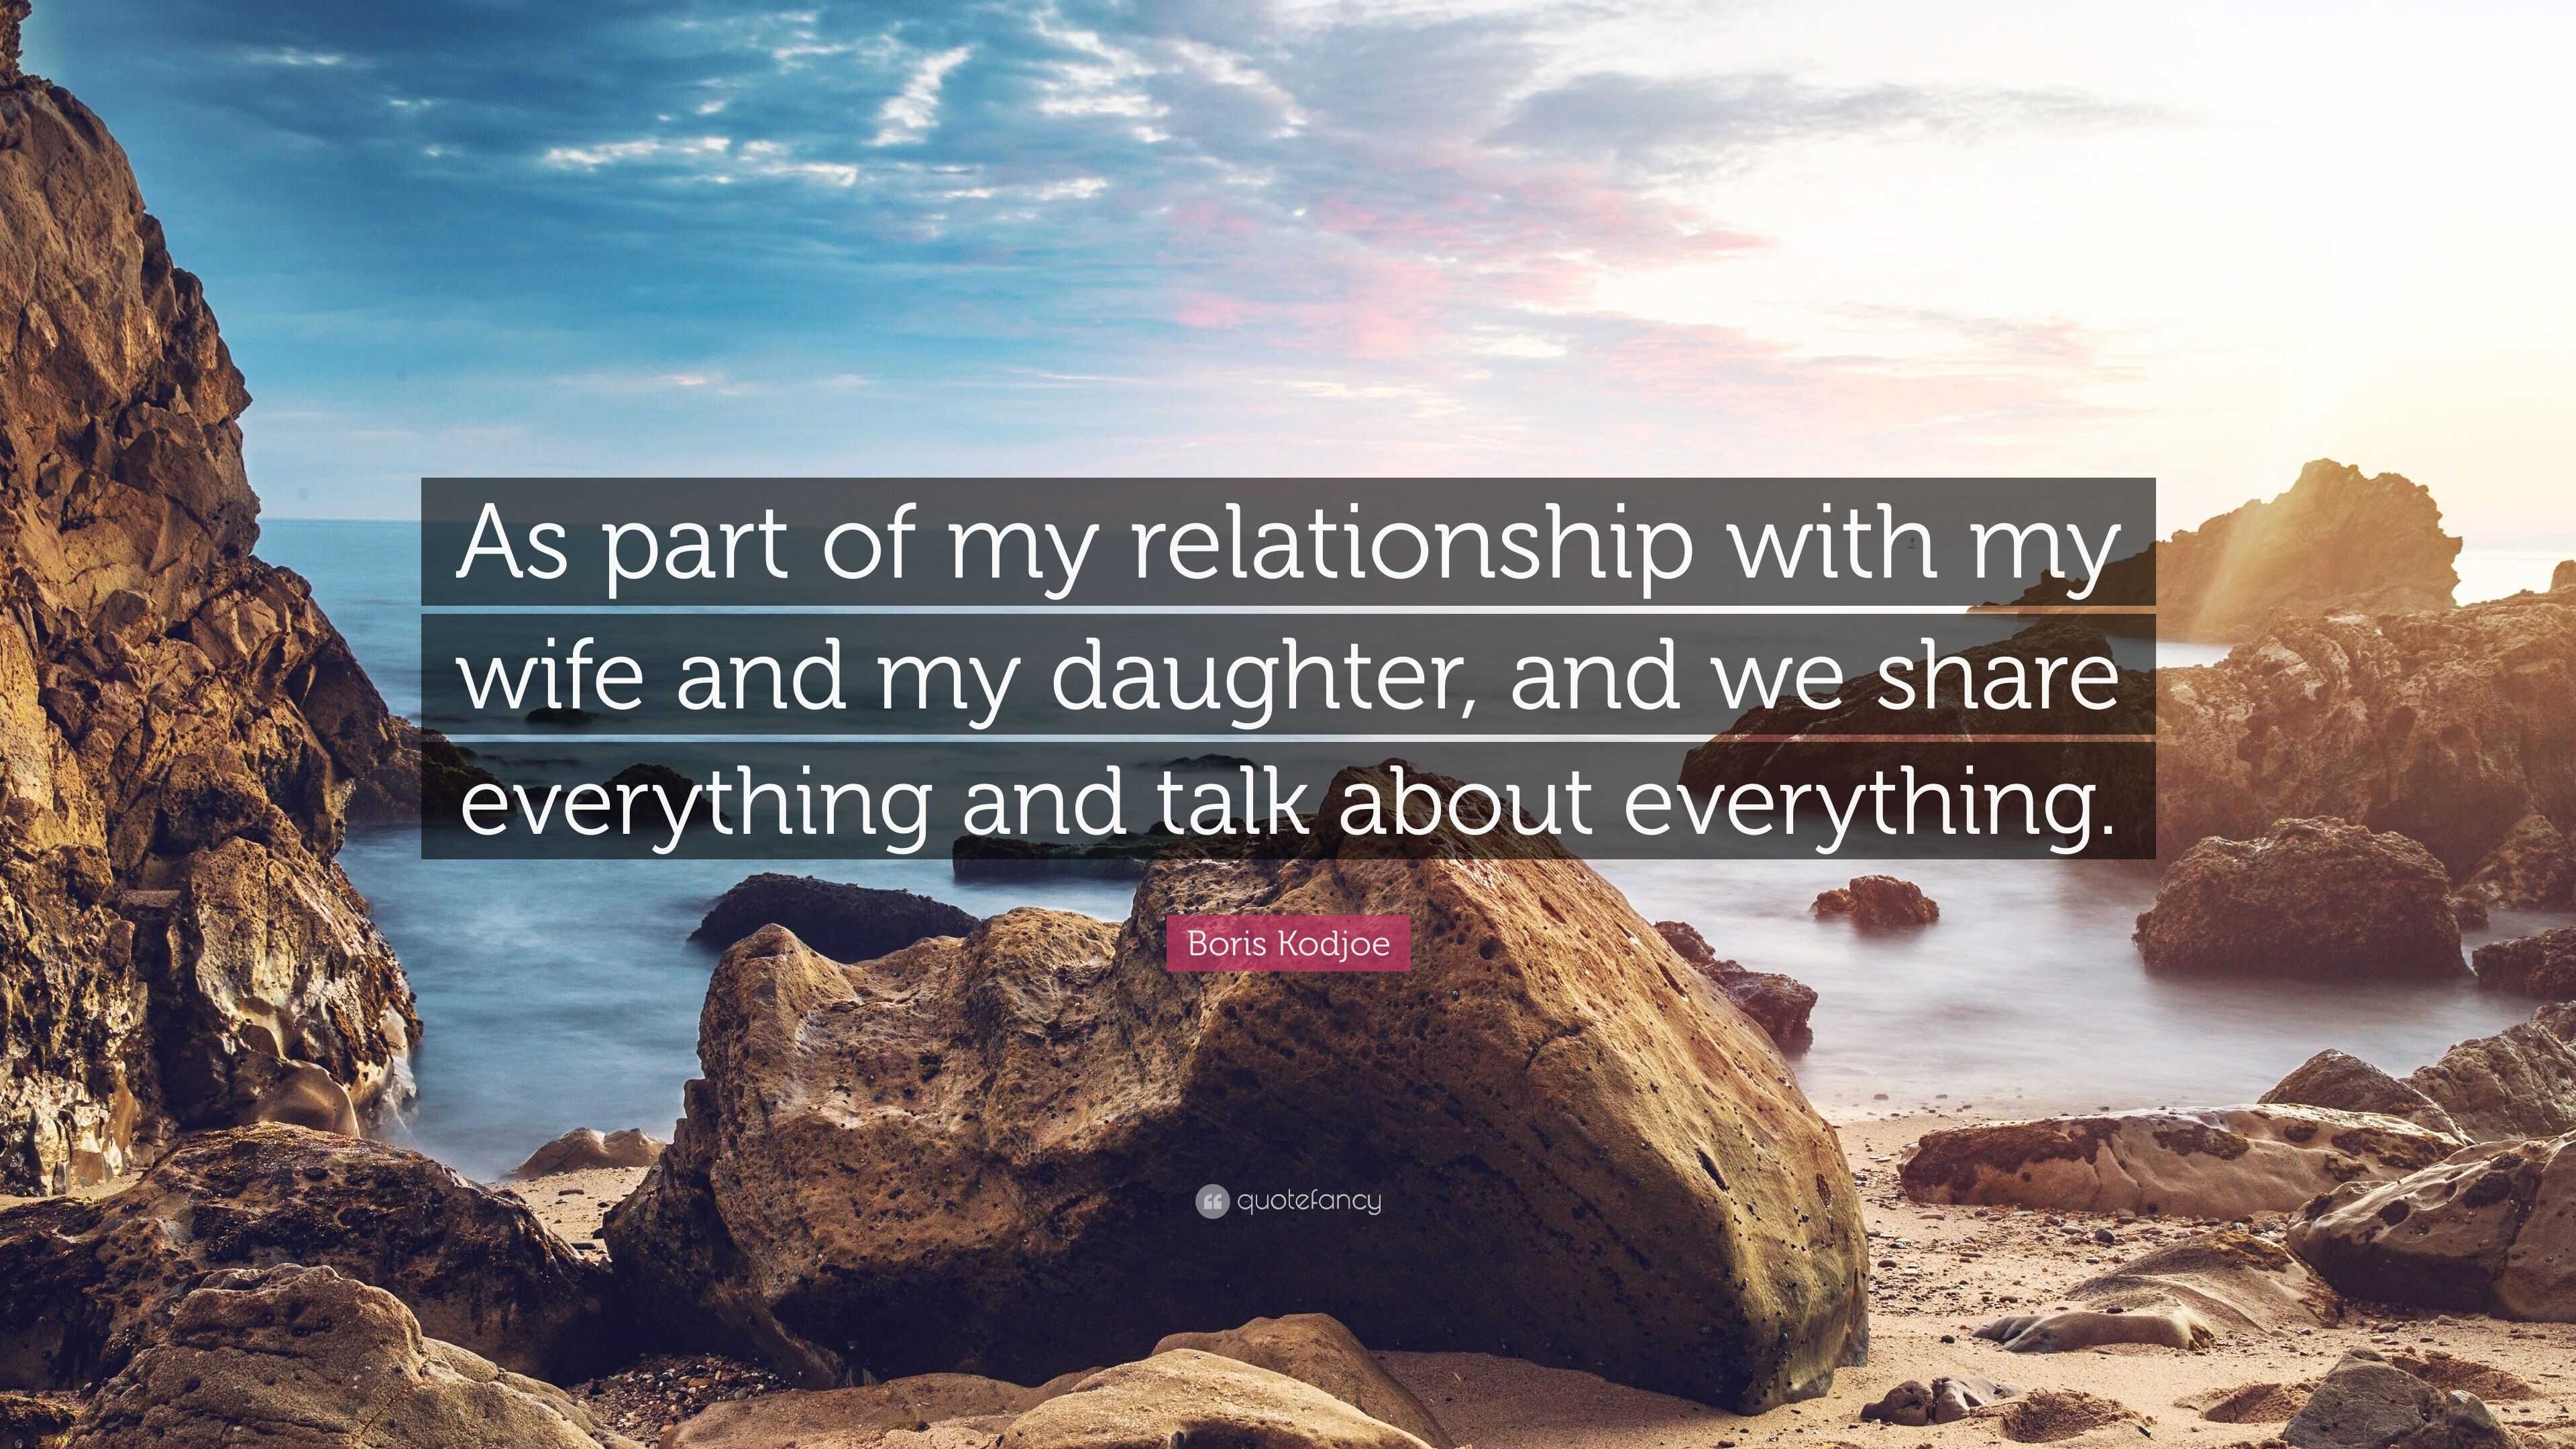 Boris Kodjoe Quote: “As part of my relationship with my wife and